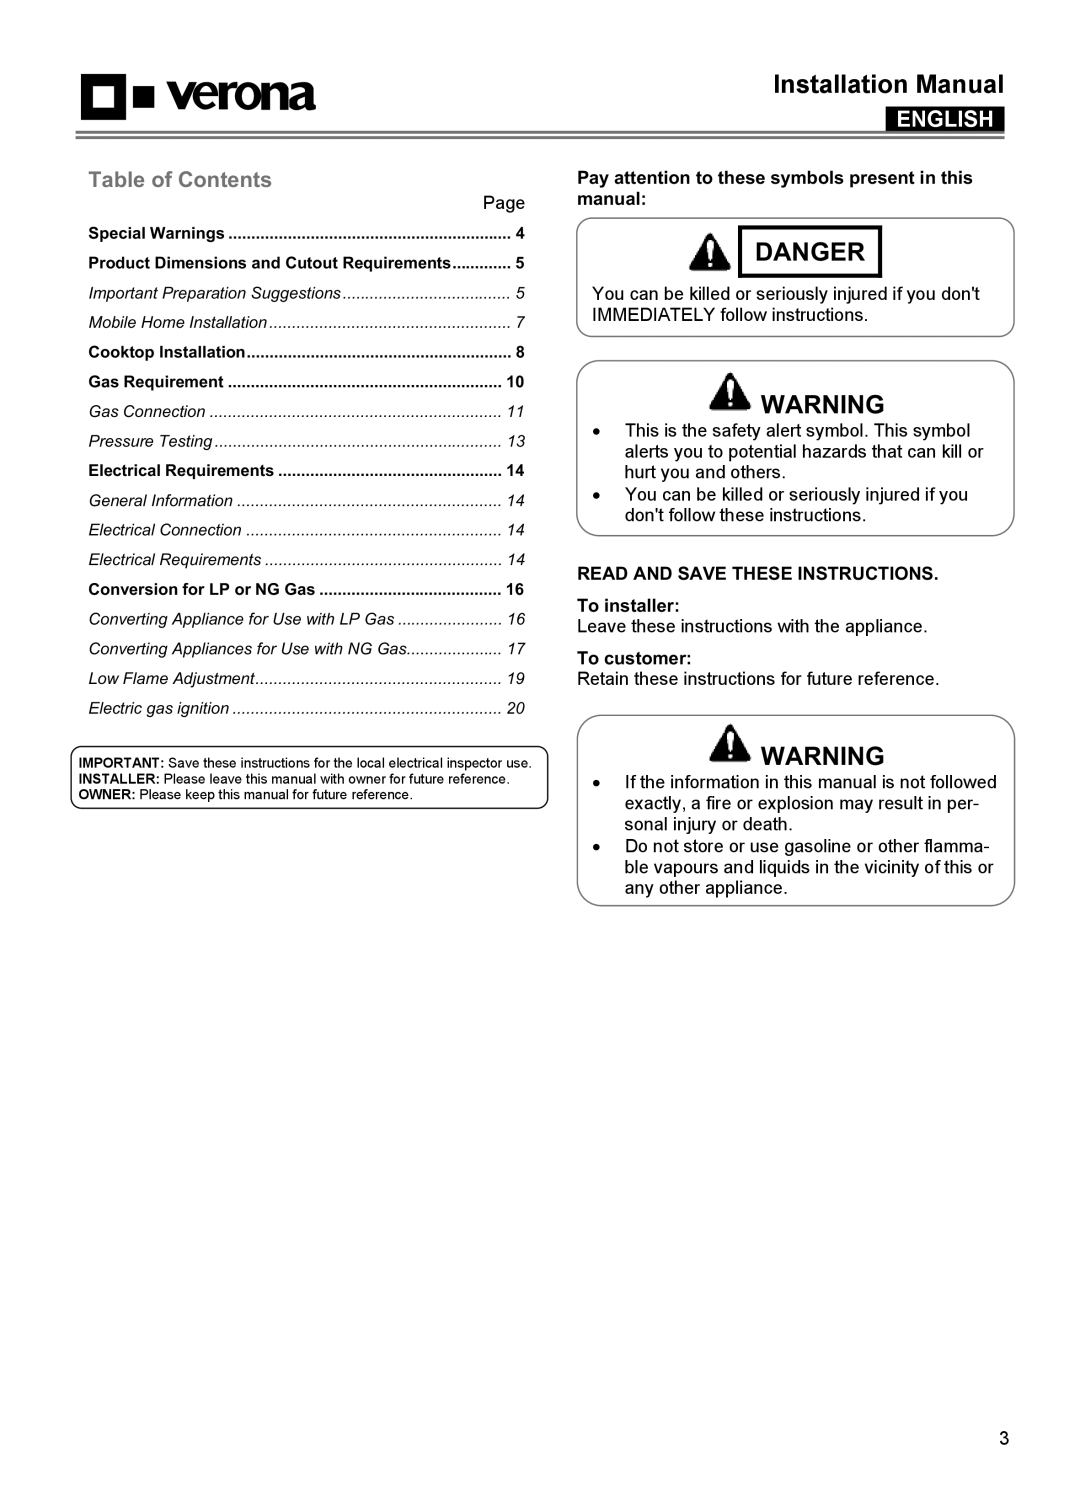 Verona VECTGMS304SS Installation Manual, Danger, English, Pay attention to these symbols present in this manual, Page 